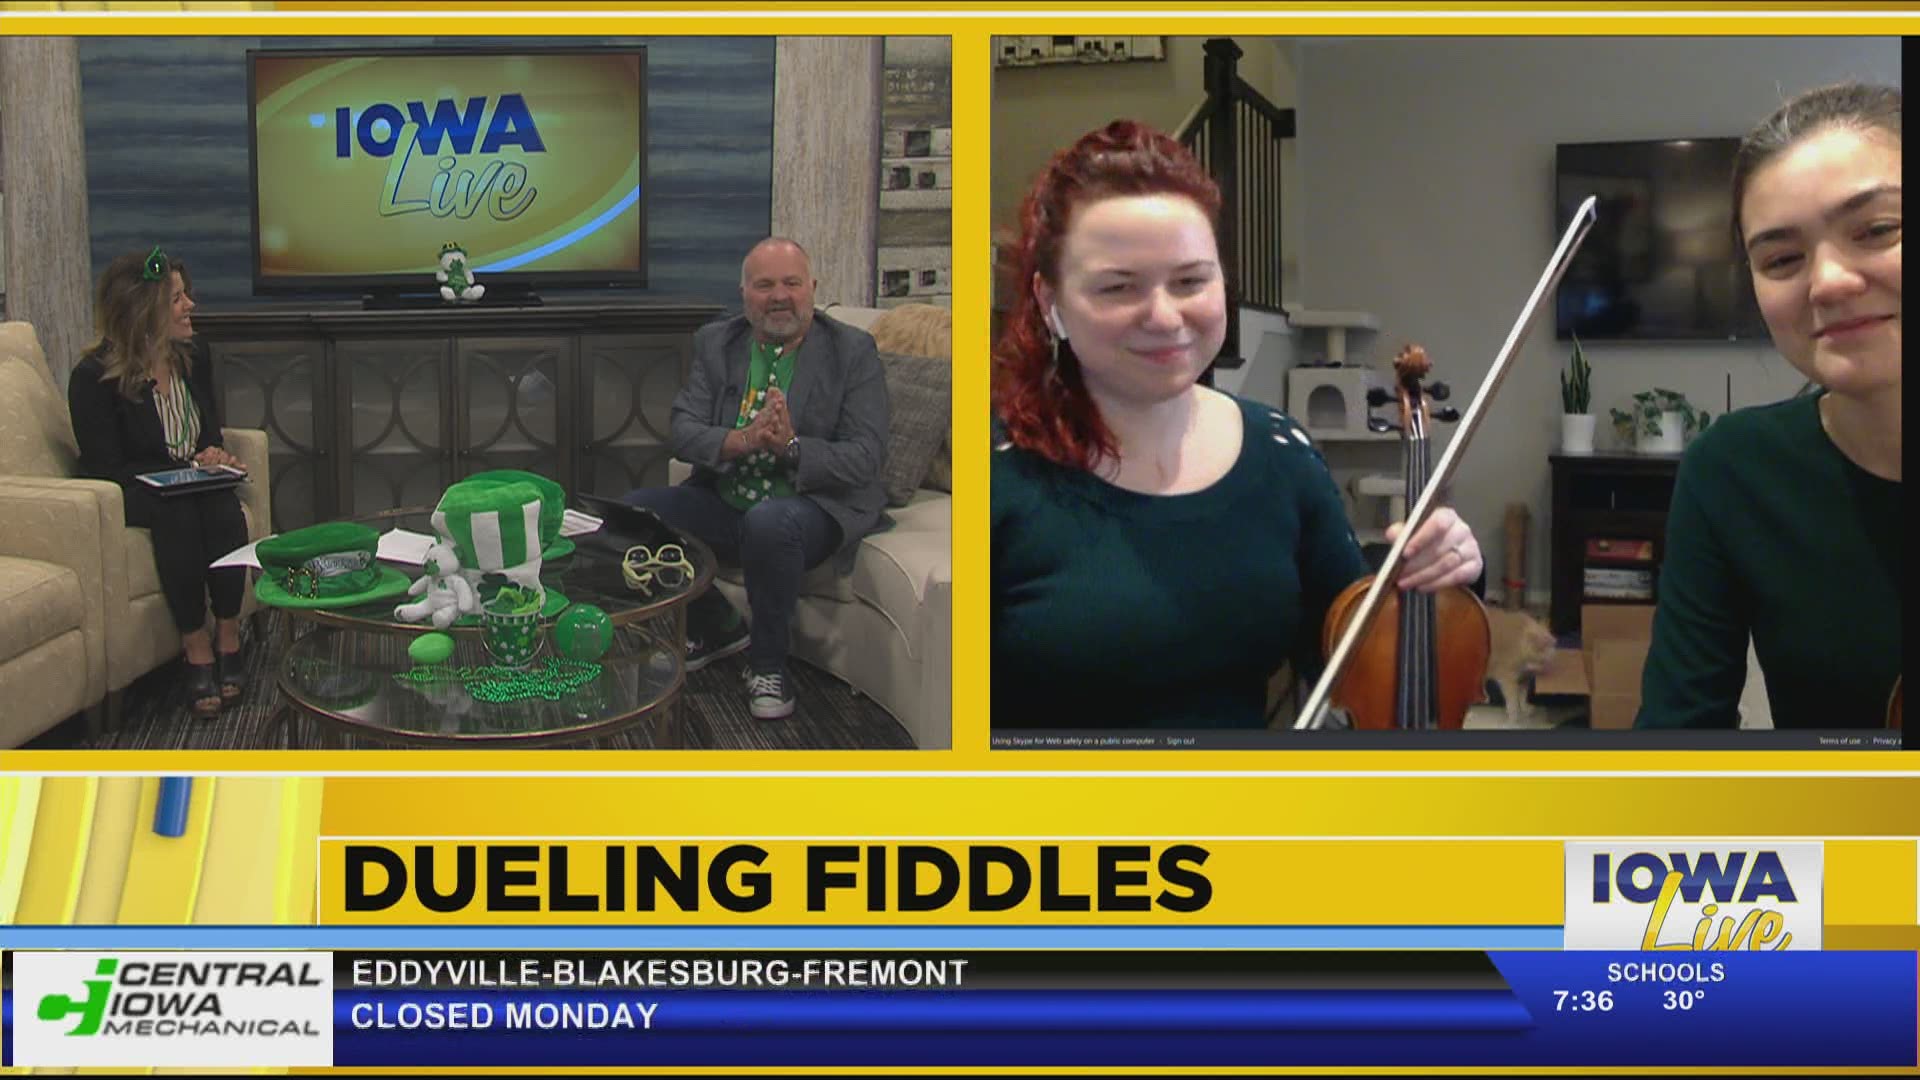 Tune into the Dueling Fiddles' St. Patrick's Day live stream performance on Tuesday, March 17th from 7-8pm at Facebook.com/DuelingFiddles